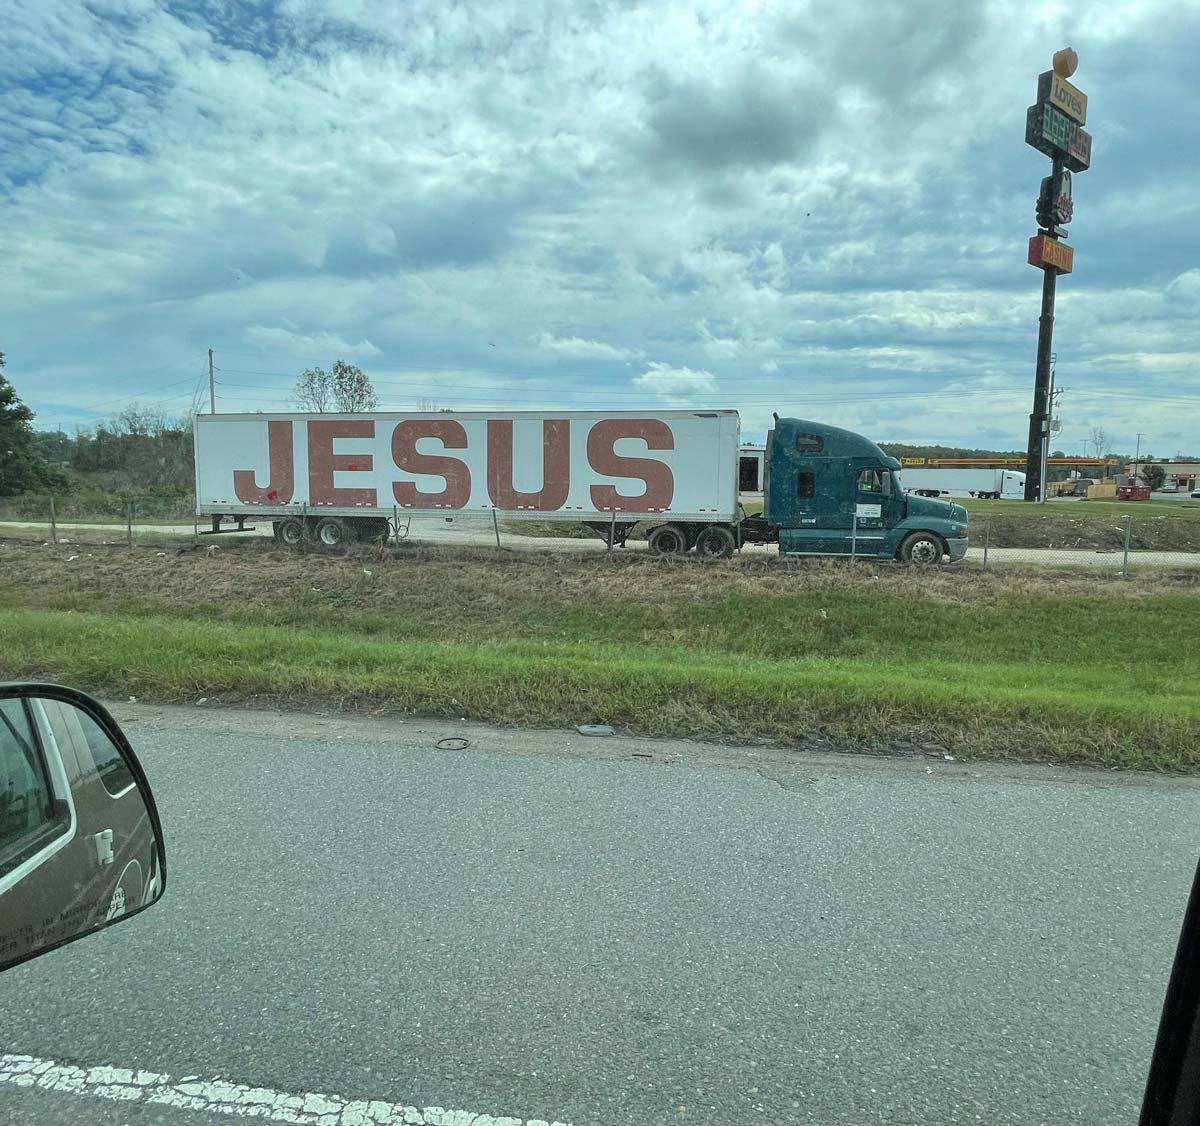 Not sure if this truck is surprised or just full of the Holy Spirit.